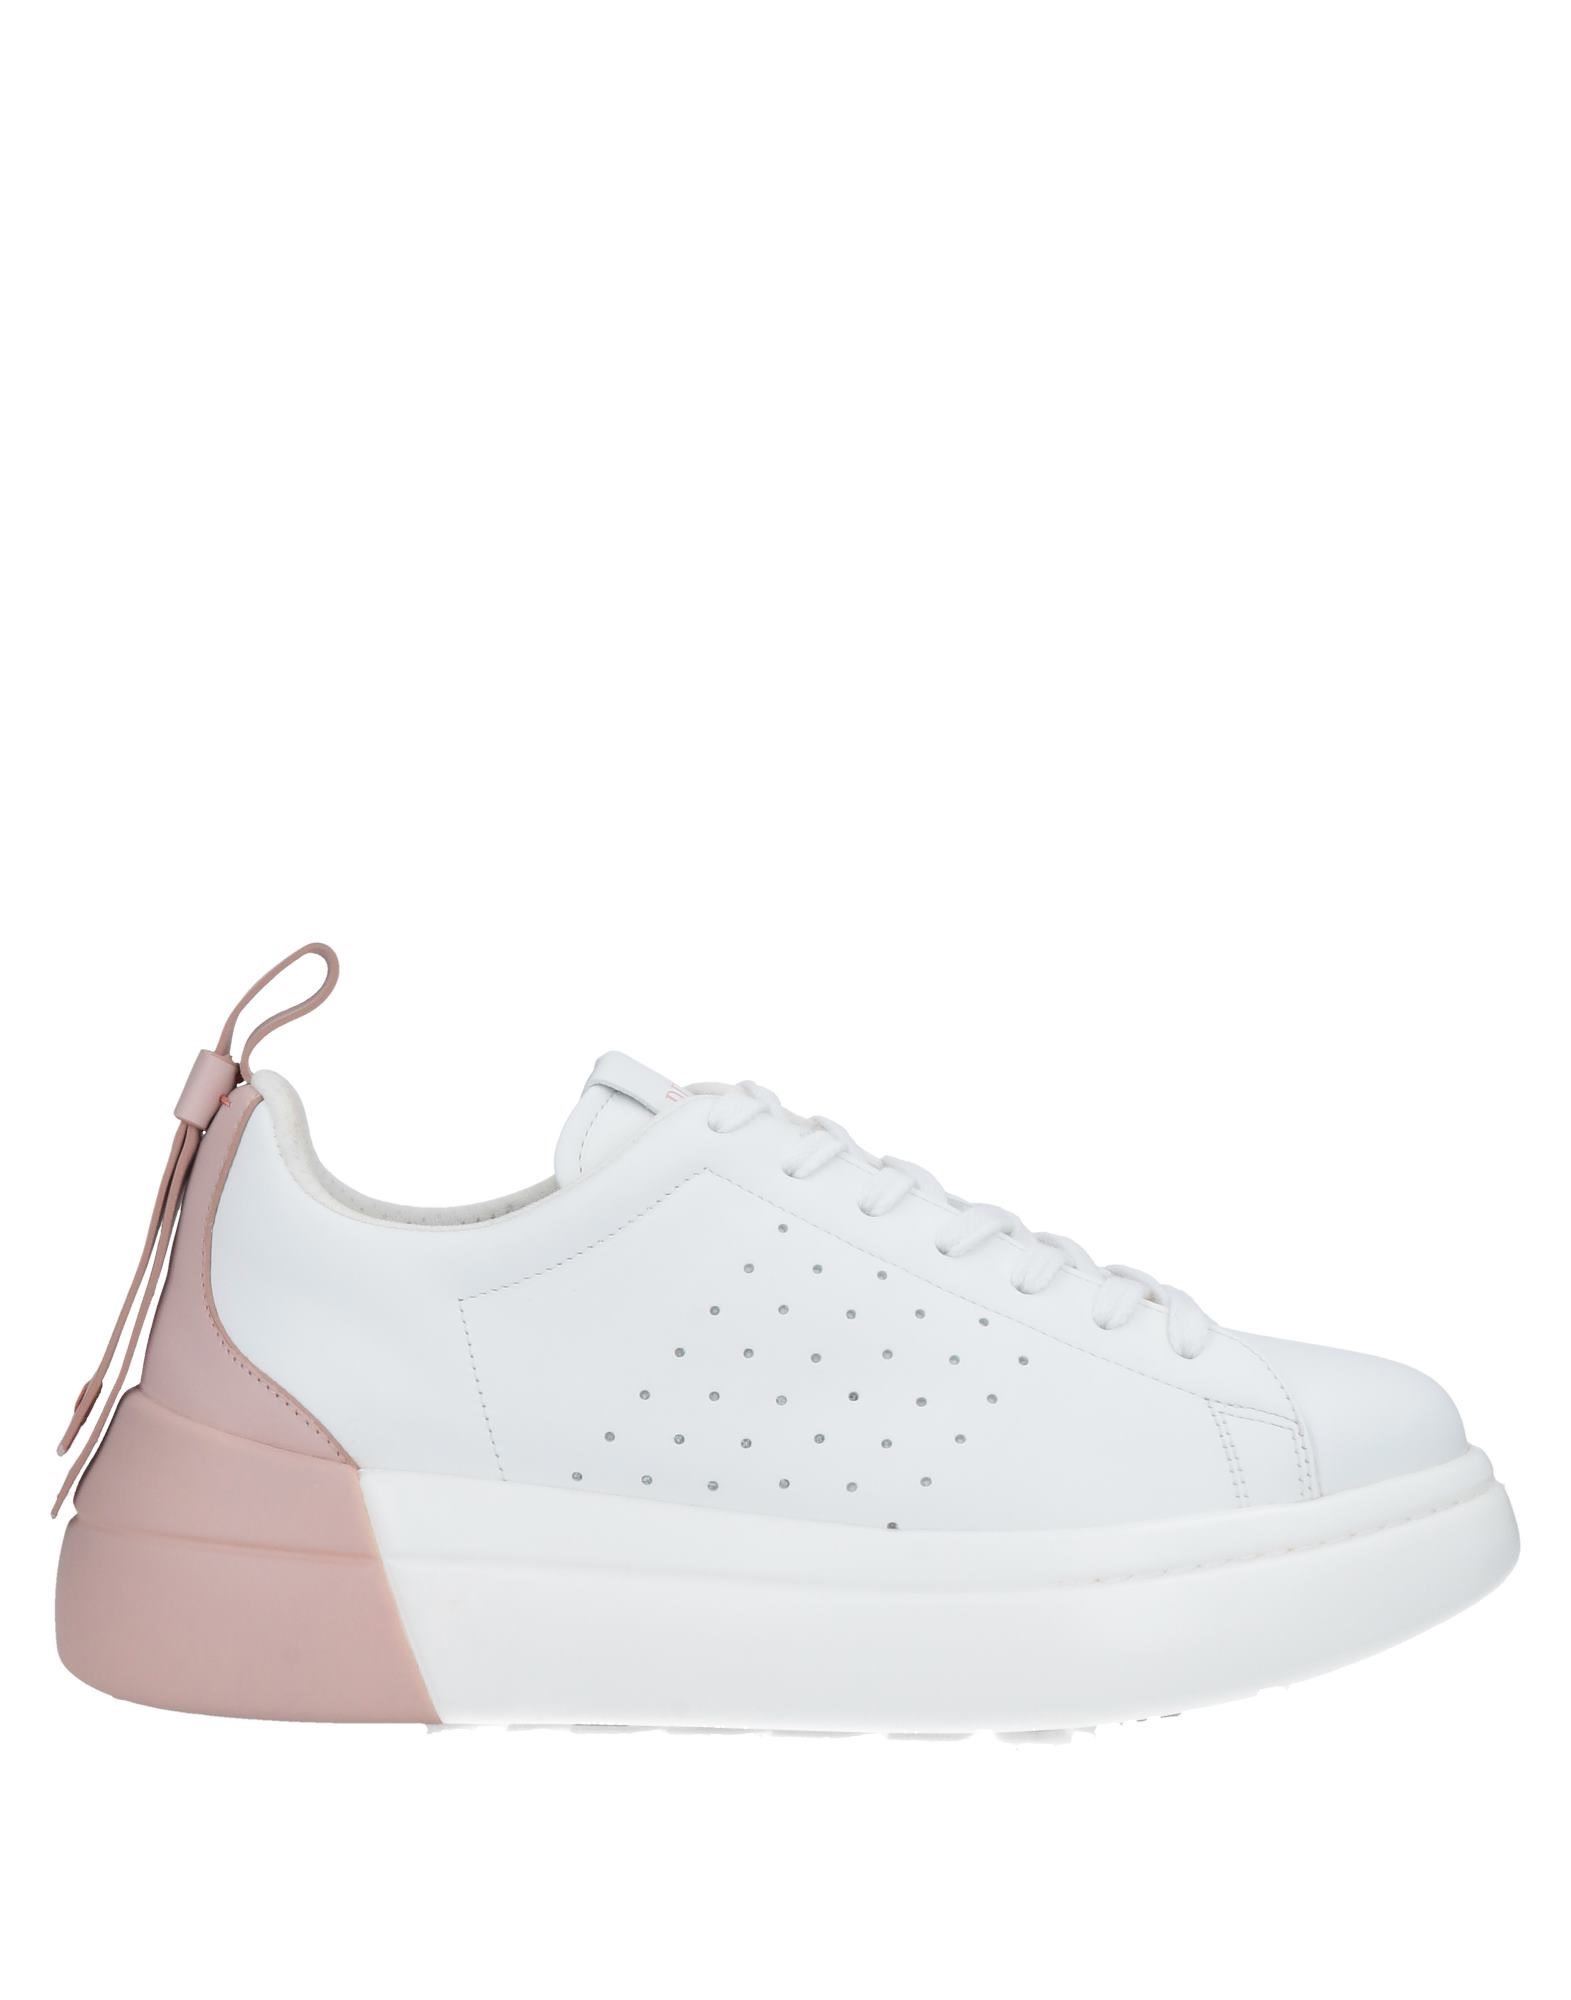 Redv Red(v) Woman Sneakers Blush Size 5 Soft Leather In Pale Pink